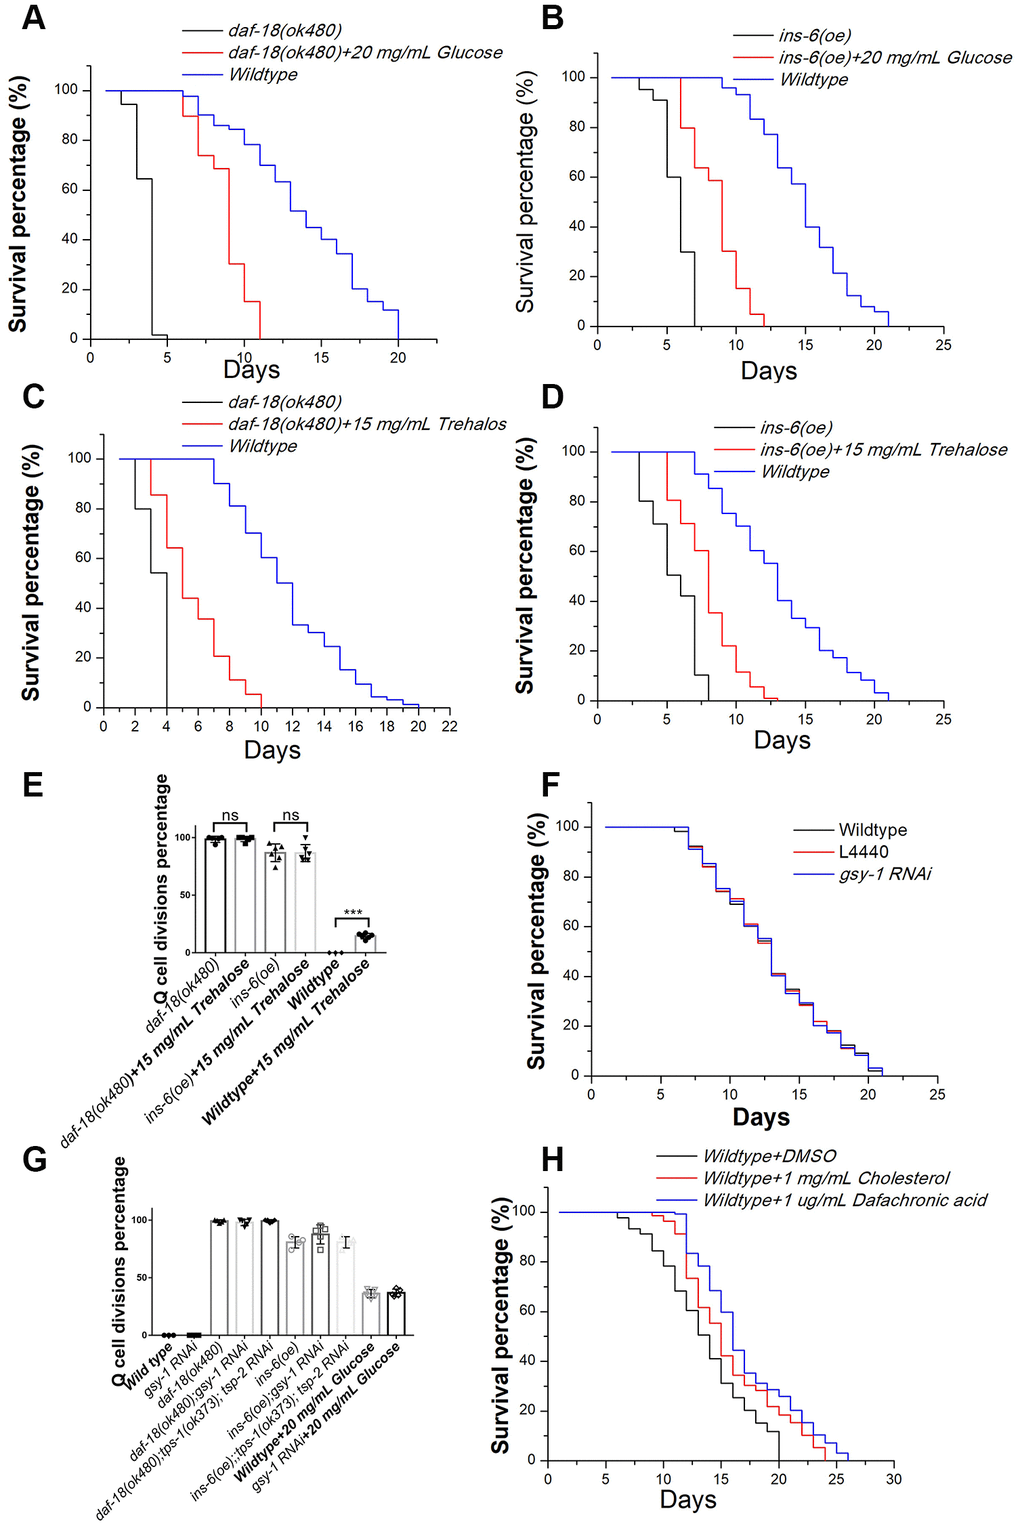 The effects of glucose, trehalose, cholesterol, and Δ7-dafachronic acid on the survival of L1-arrested worms. Glucose extends the longevity of L1-arrested ins-6 (oe) (A) and daf-18 mutants (B). Trehalose extends the longevity of L1-arrested ins-6 (oe) (C) and daf-18 mutants (D). (E) Trehalose has no suppression function on Q-cell proliferation; in contrast, it can induce Q-cell proliferation in wild-type L1-arrested worms. Data are the average of at least three independent experiments. Error bars: Standard Deviation (SD).***: PF) The glycogen synthesis controlling gene gsy-1 has no effect on the survival of L1-arrested worms. (G) The glycogen and trehalose synthesis controlling genes gsy-1 and tps-1/2 have no effect on the Q-cell divisions in daf-18 (-), ins-6 (oe), and wild-type L1-arrested worms. (H) Cholesterol and dafchronic acid can extend the survival of wild-type L1-arrested worms. Survival of these worms was checked every day, and the mean survival rate was calculated using the Kaplan-Meier method, and any significant difference in overall survival rates was determined using the log-rank test (P-value; see Supplementary Table 1).